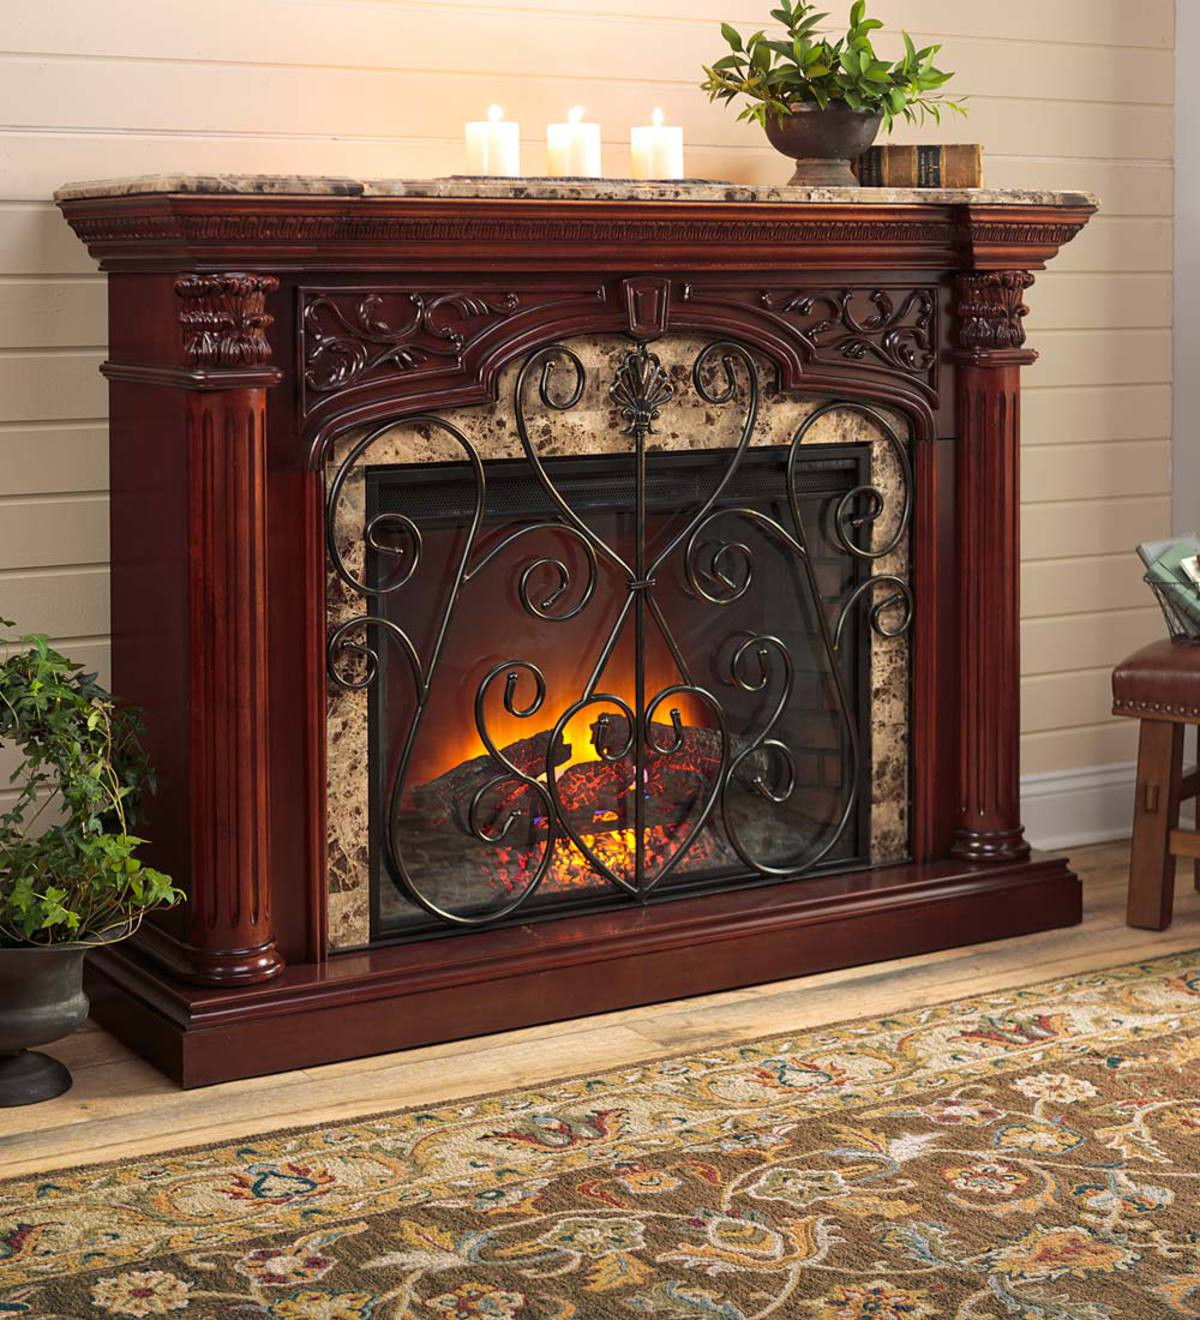 Electric Fireplace With Marble Top
 Jamestown Electric Fireplace with Marble Mantel